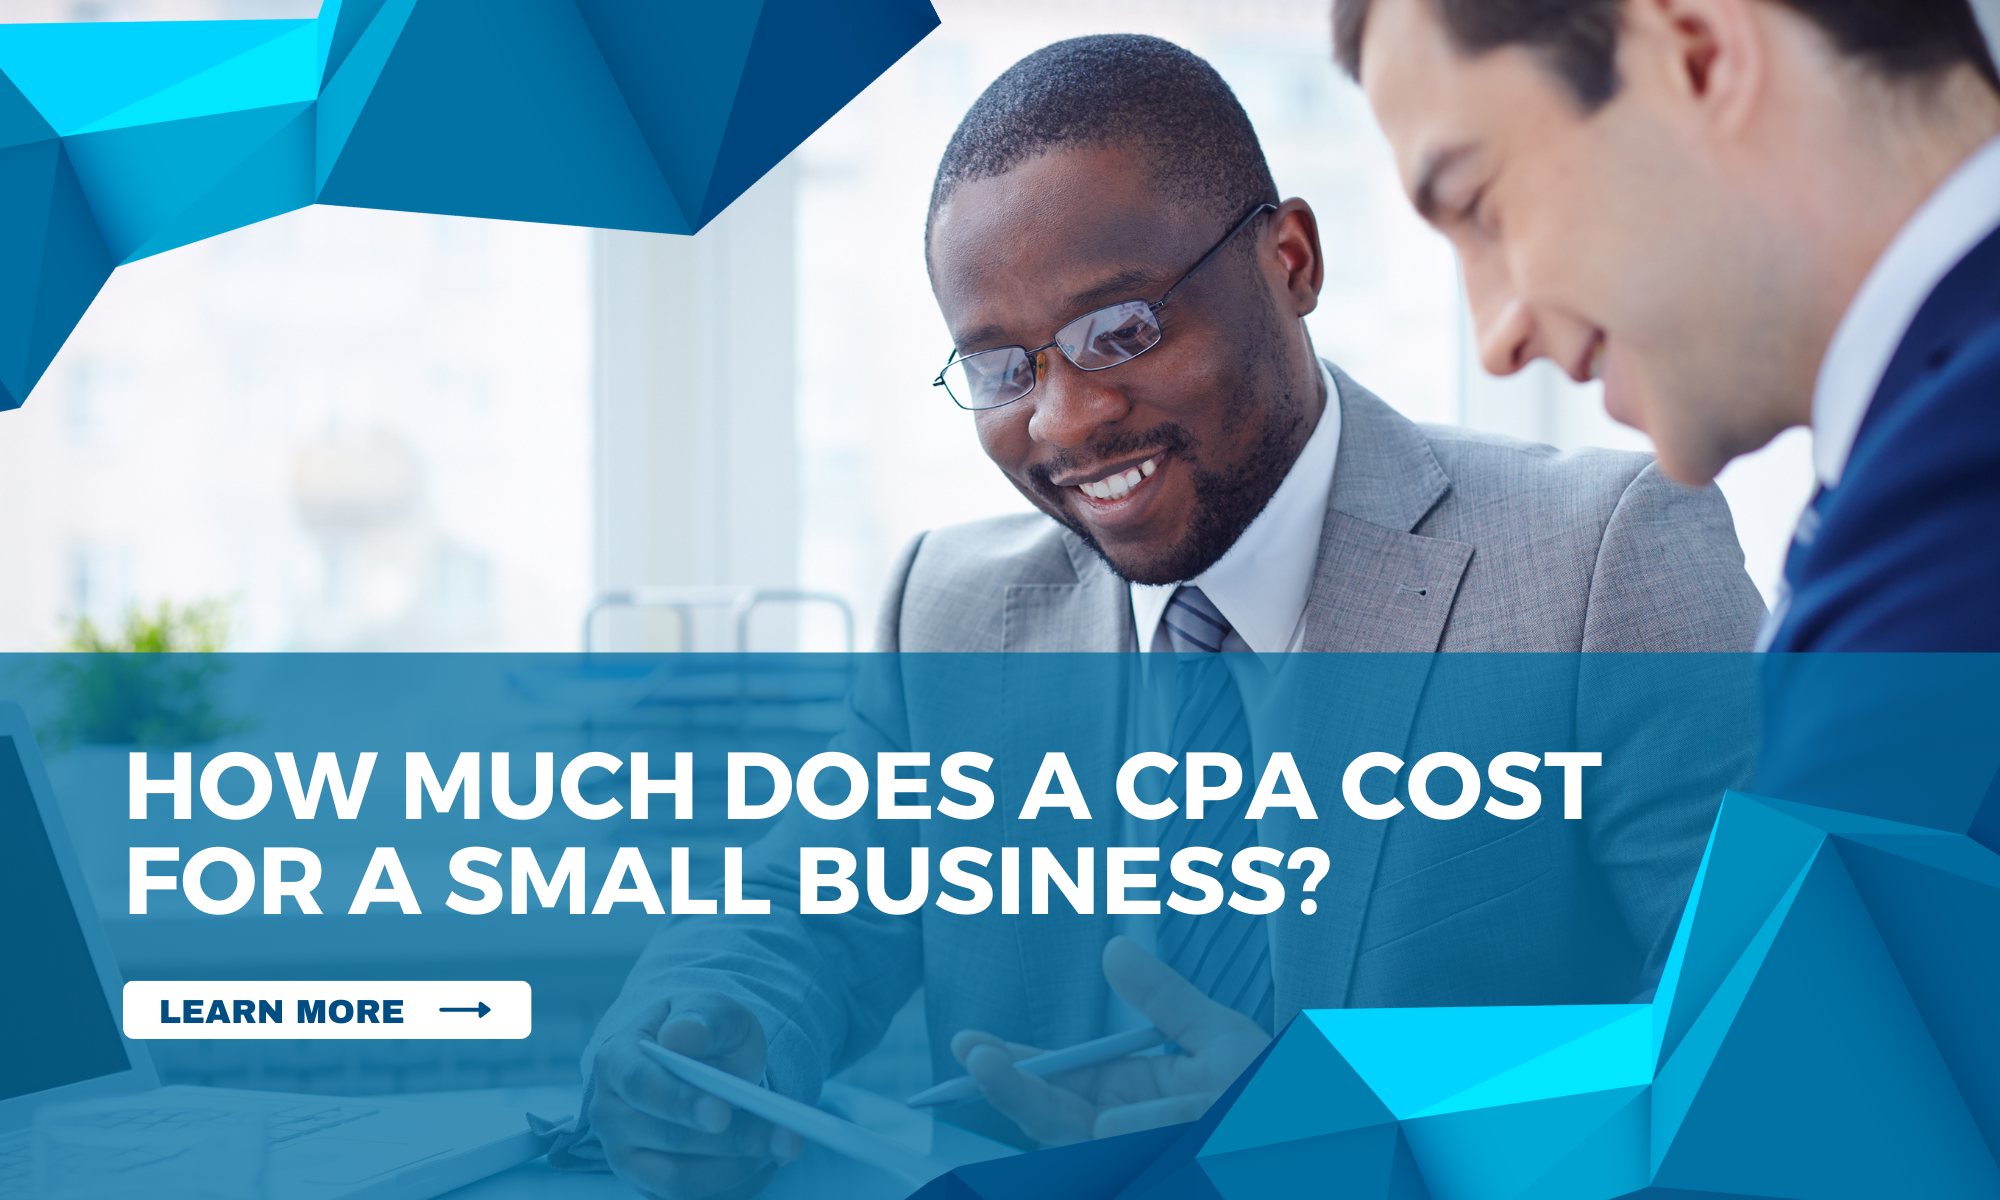 How Much Does a CPA Cost for a Small Business?